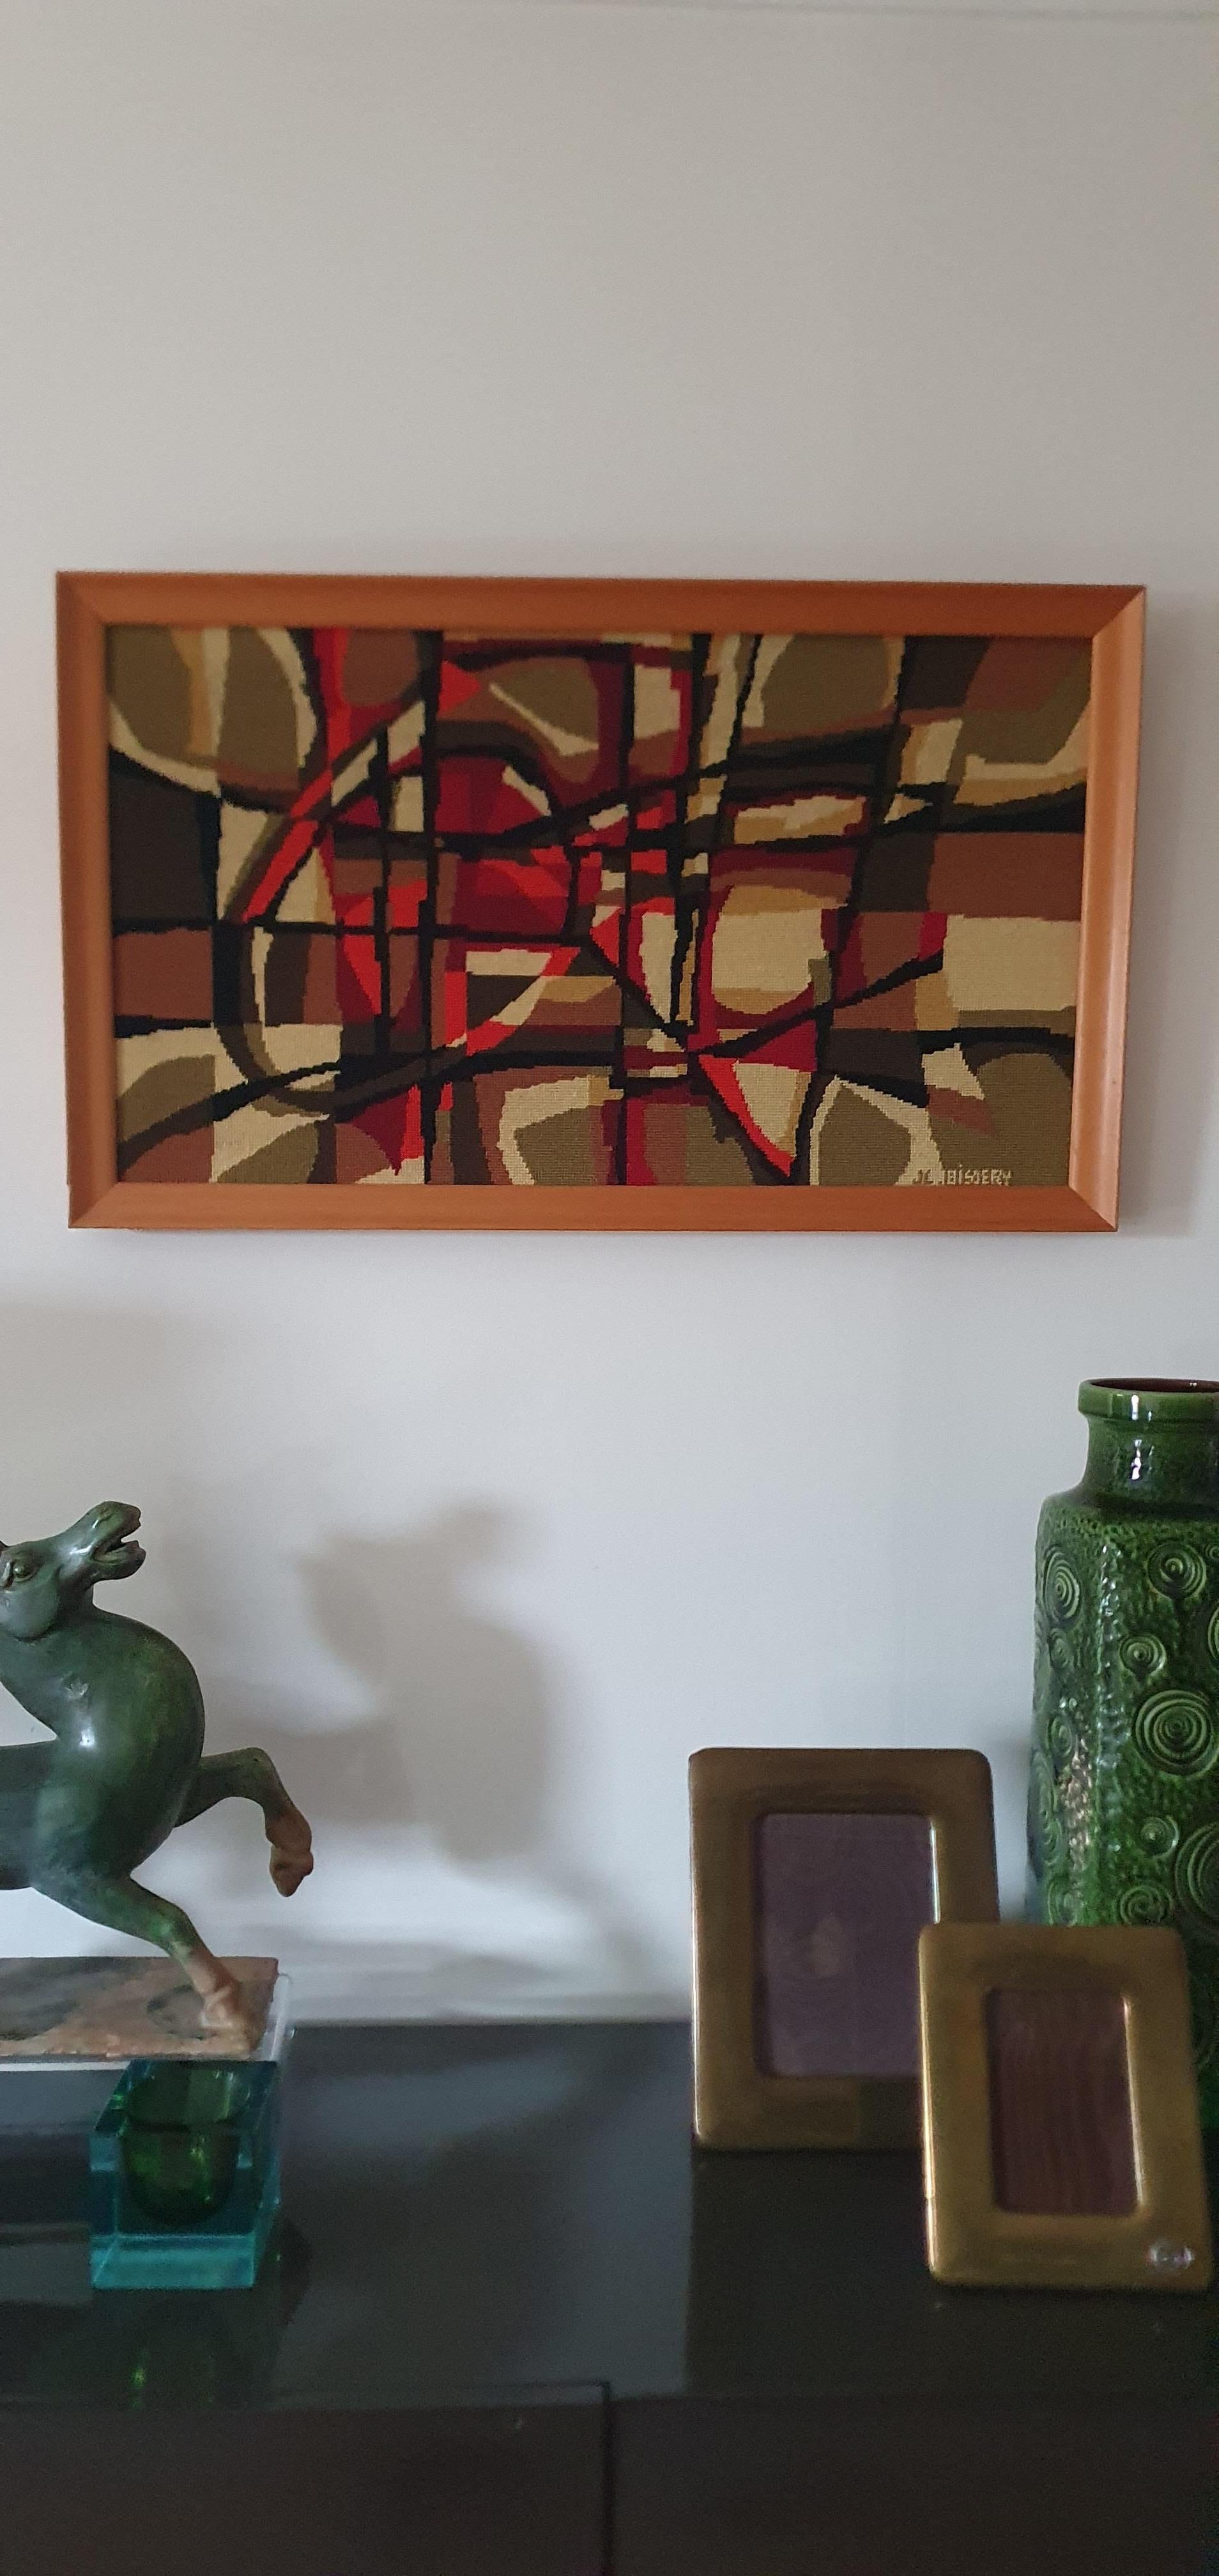 This is a beautiful and immaculate condition tapestry by the renowned artist Jean-Claude Bissery, Circa 1960-1970  this striking rectangular tapestry in mechanical point is made of wool in the atelier Jean Laurent Aubusson workshop. 

The graphic